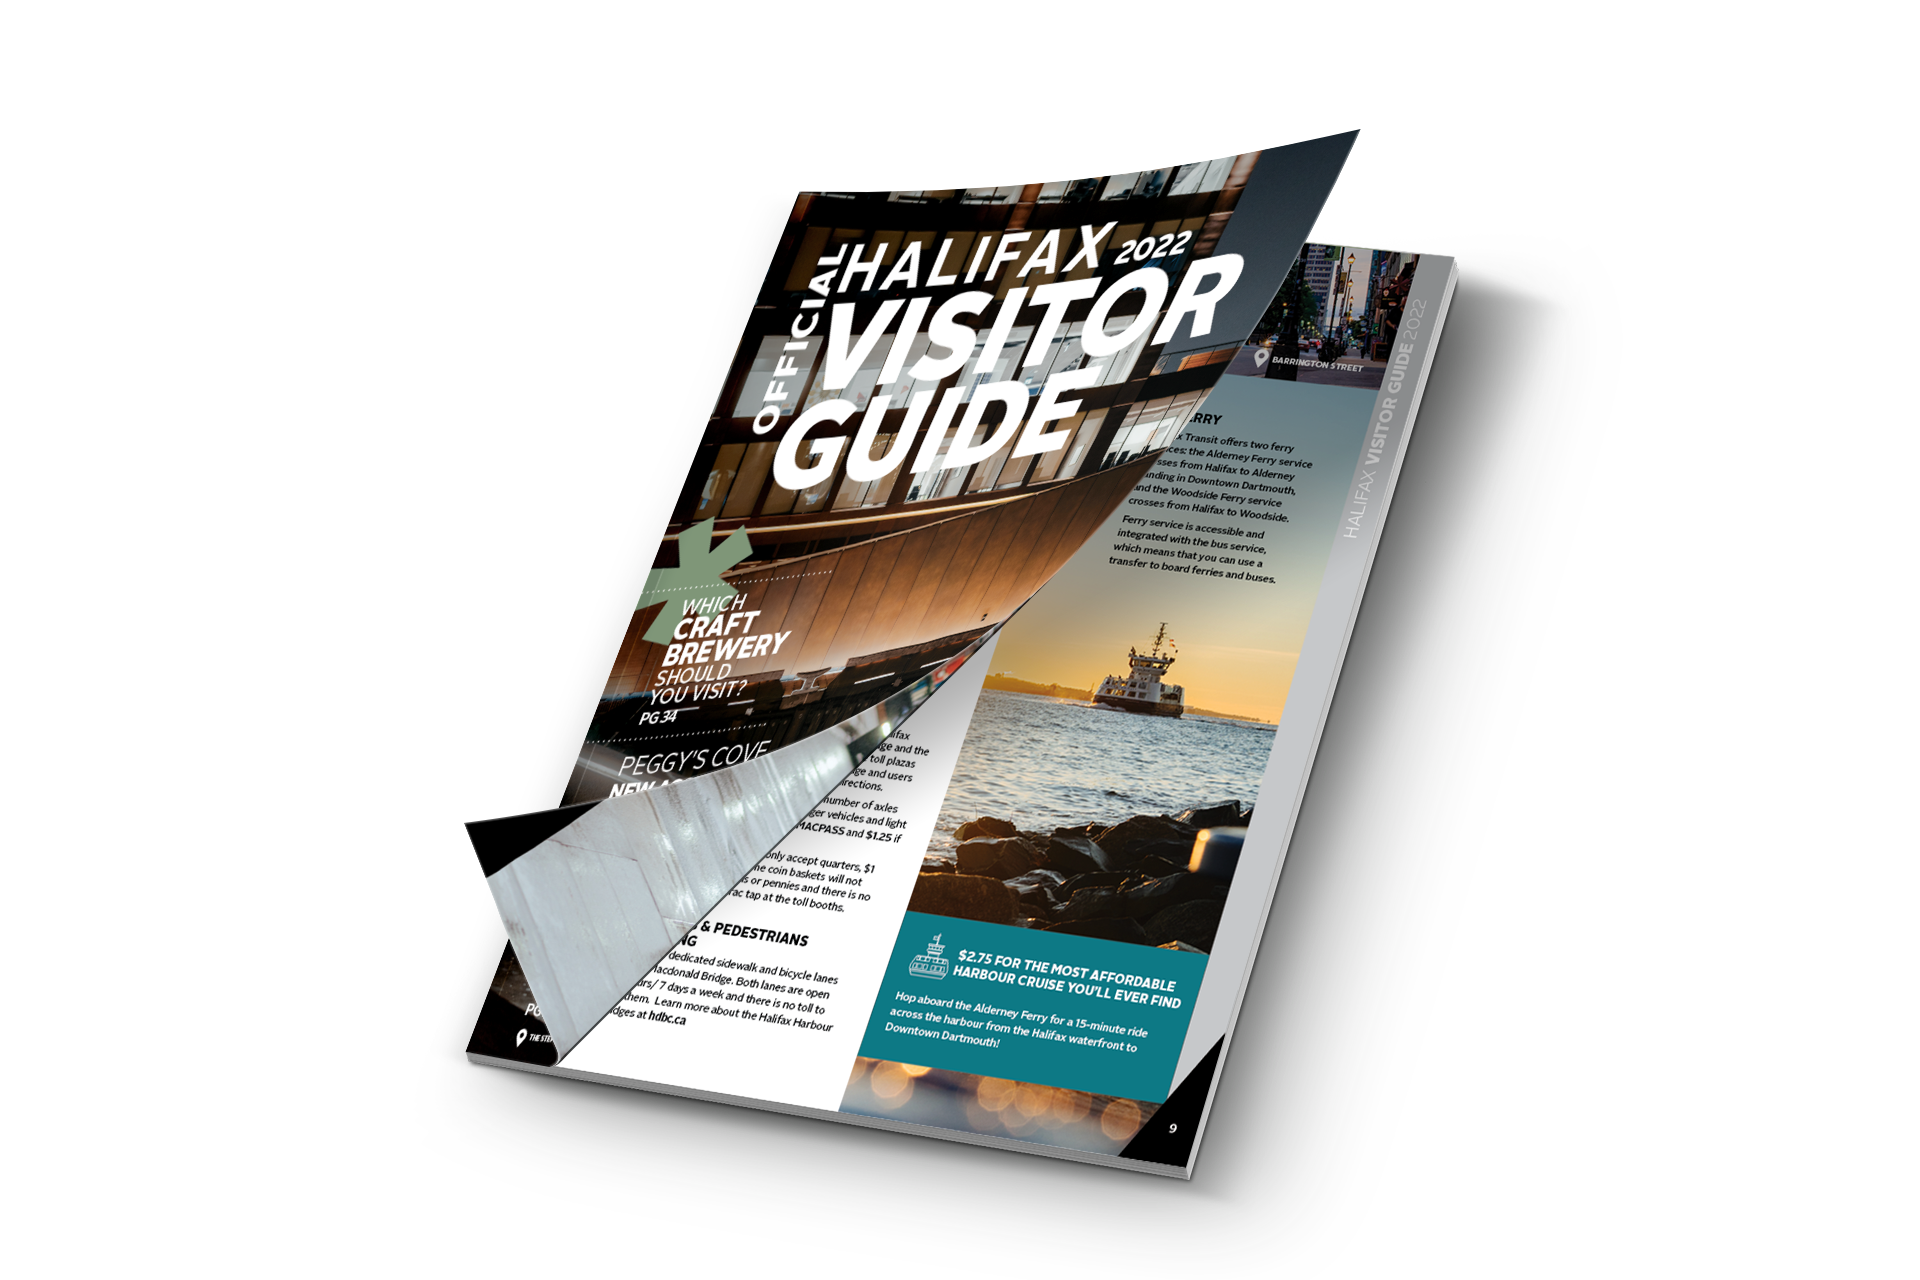 The Official Halifax Visitor Guide